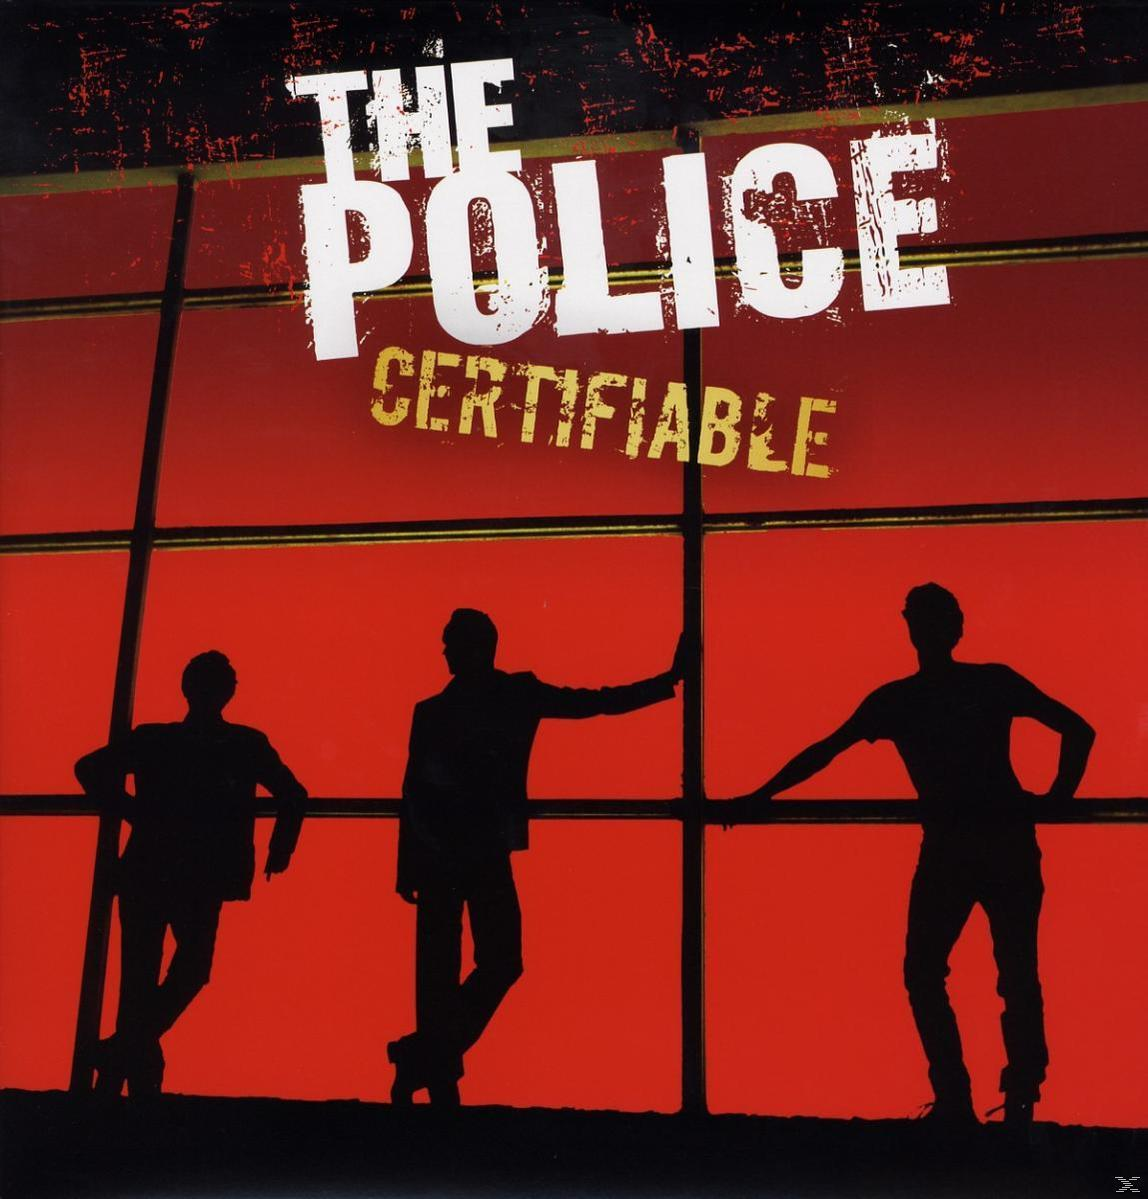 - The - Police Certifiable (Vinyl)